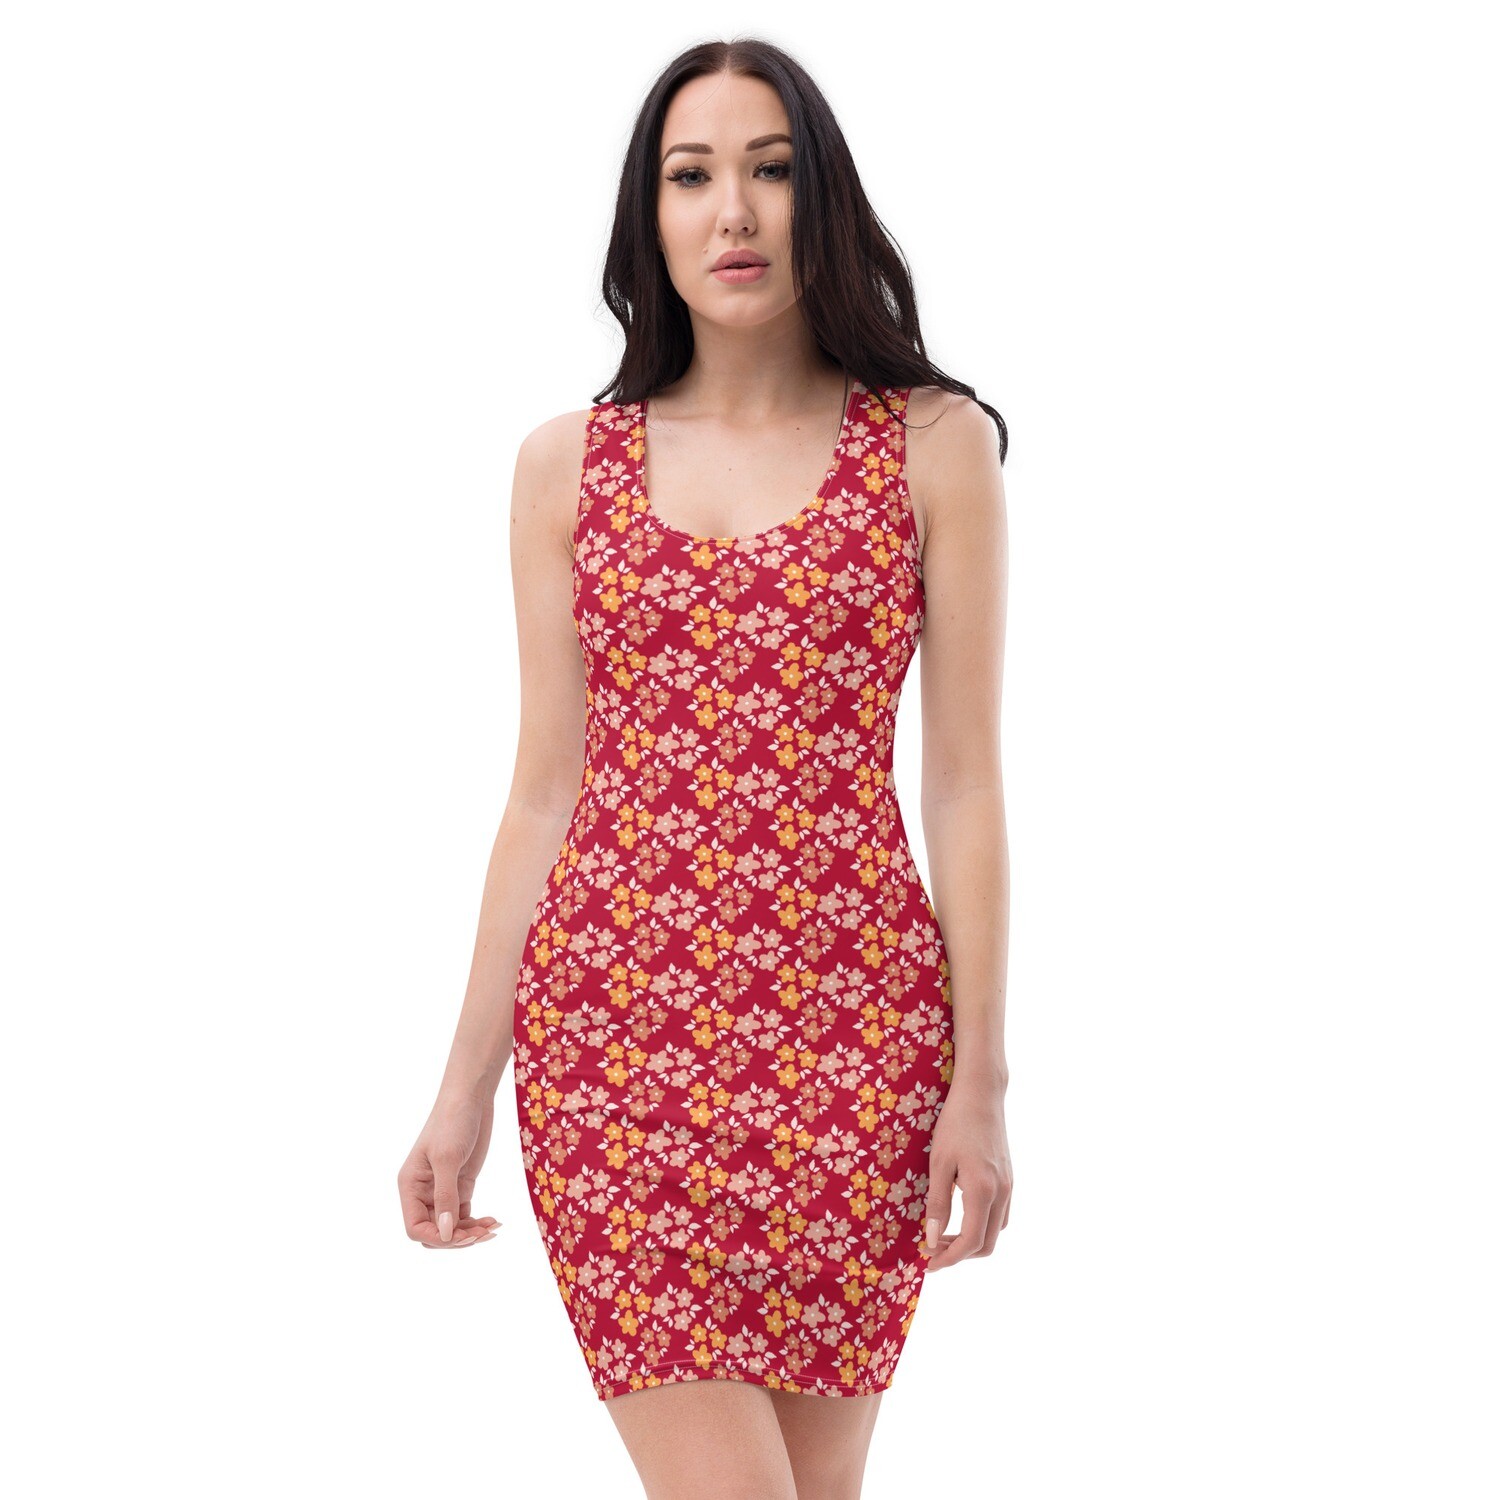 Hibiscus red stretchy tight bodycon dress with retro flowers in sizes XS-XL